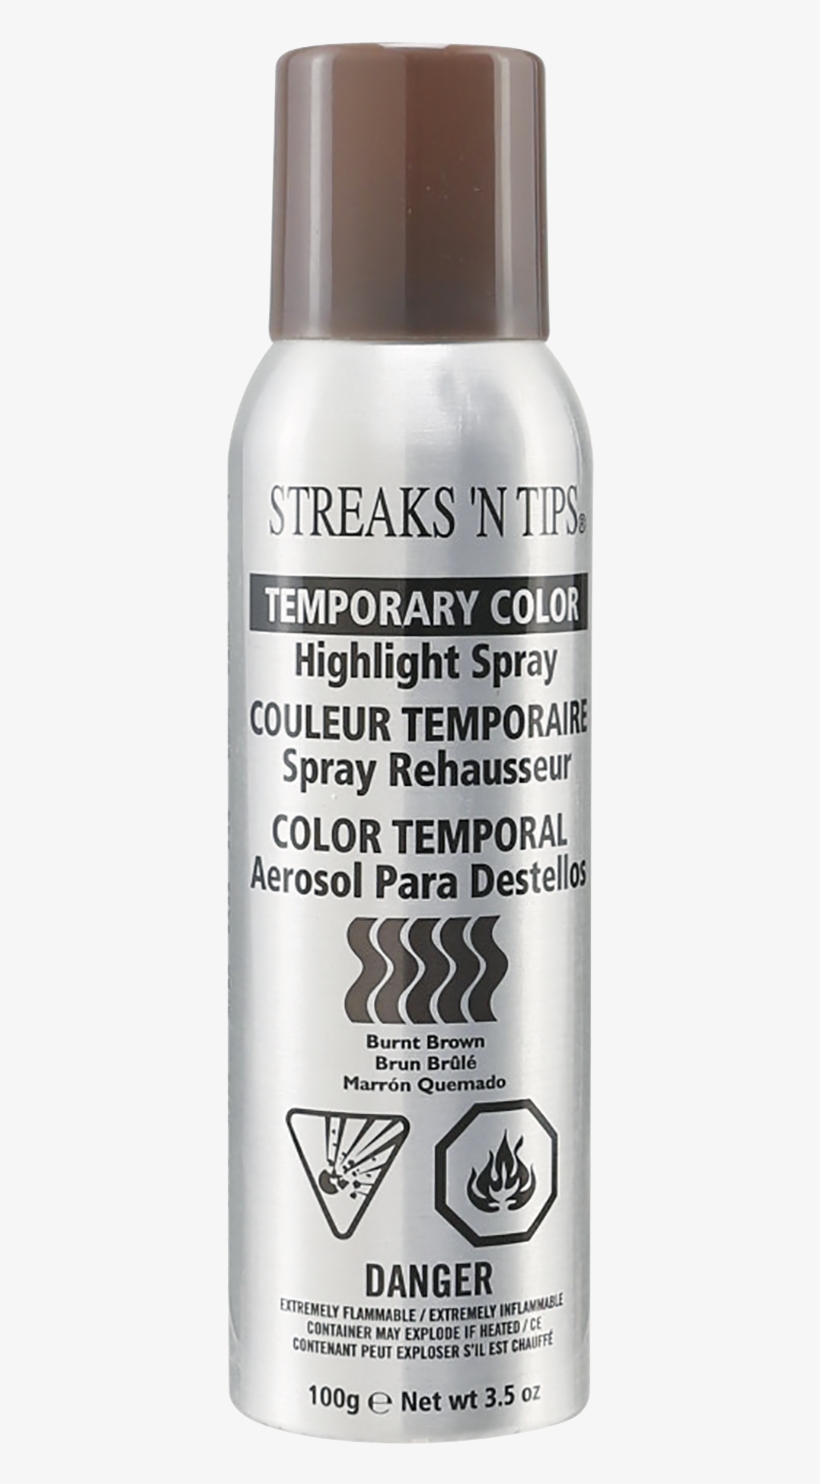 Temporary Highlight Color Spray By Streaks N' Tips - Streaks N Tips Temporary Color Highlight Spray Burnt, transparent png #2207002